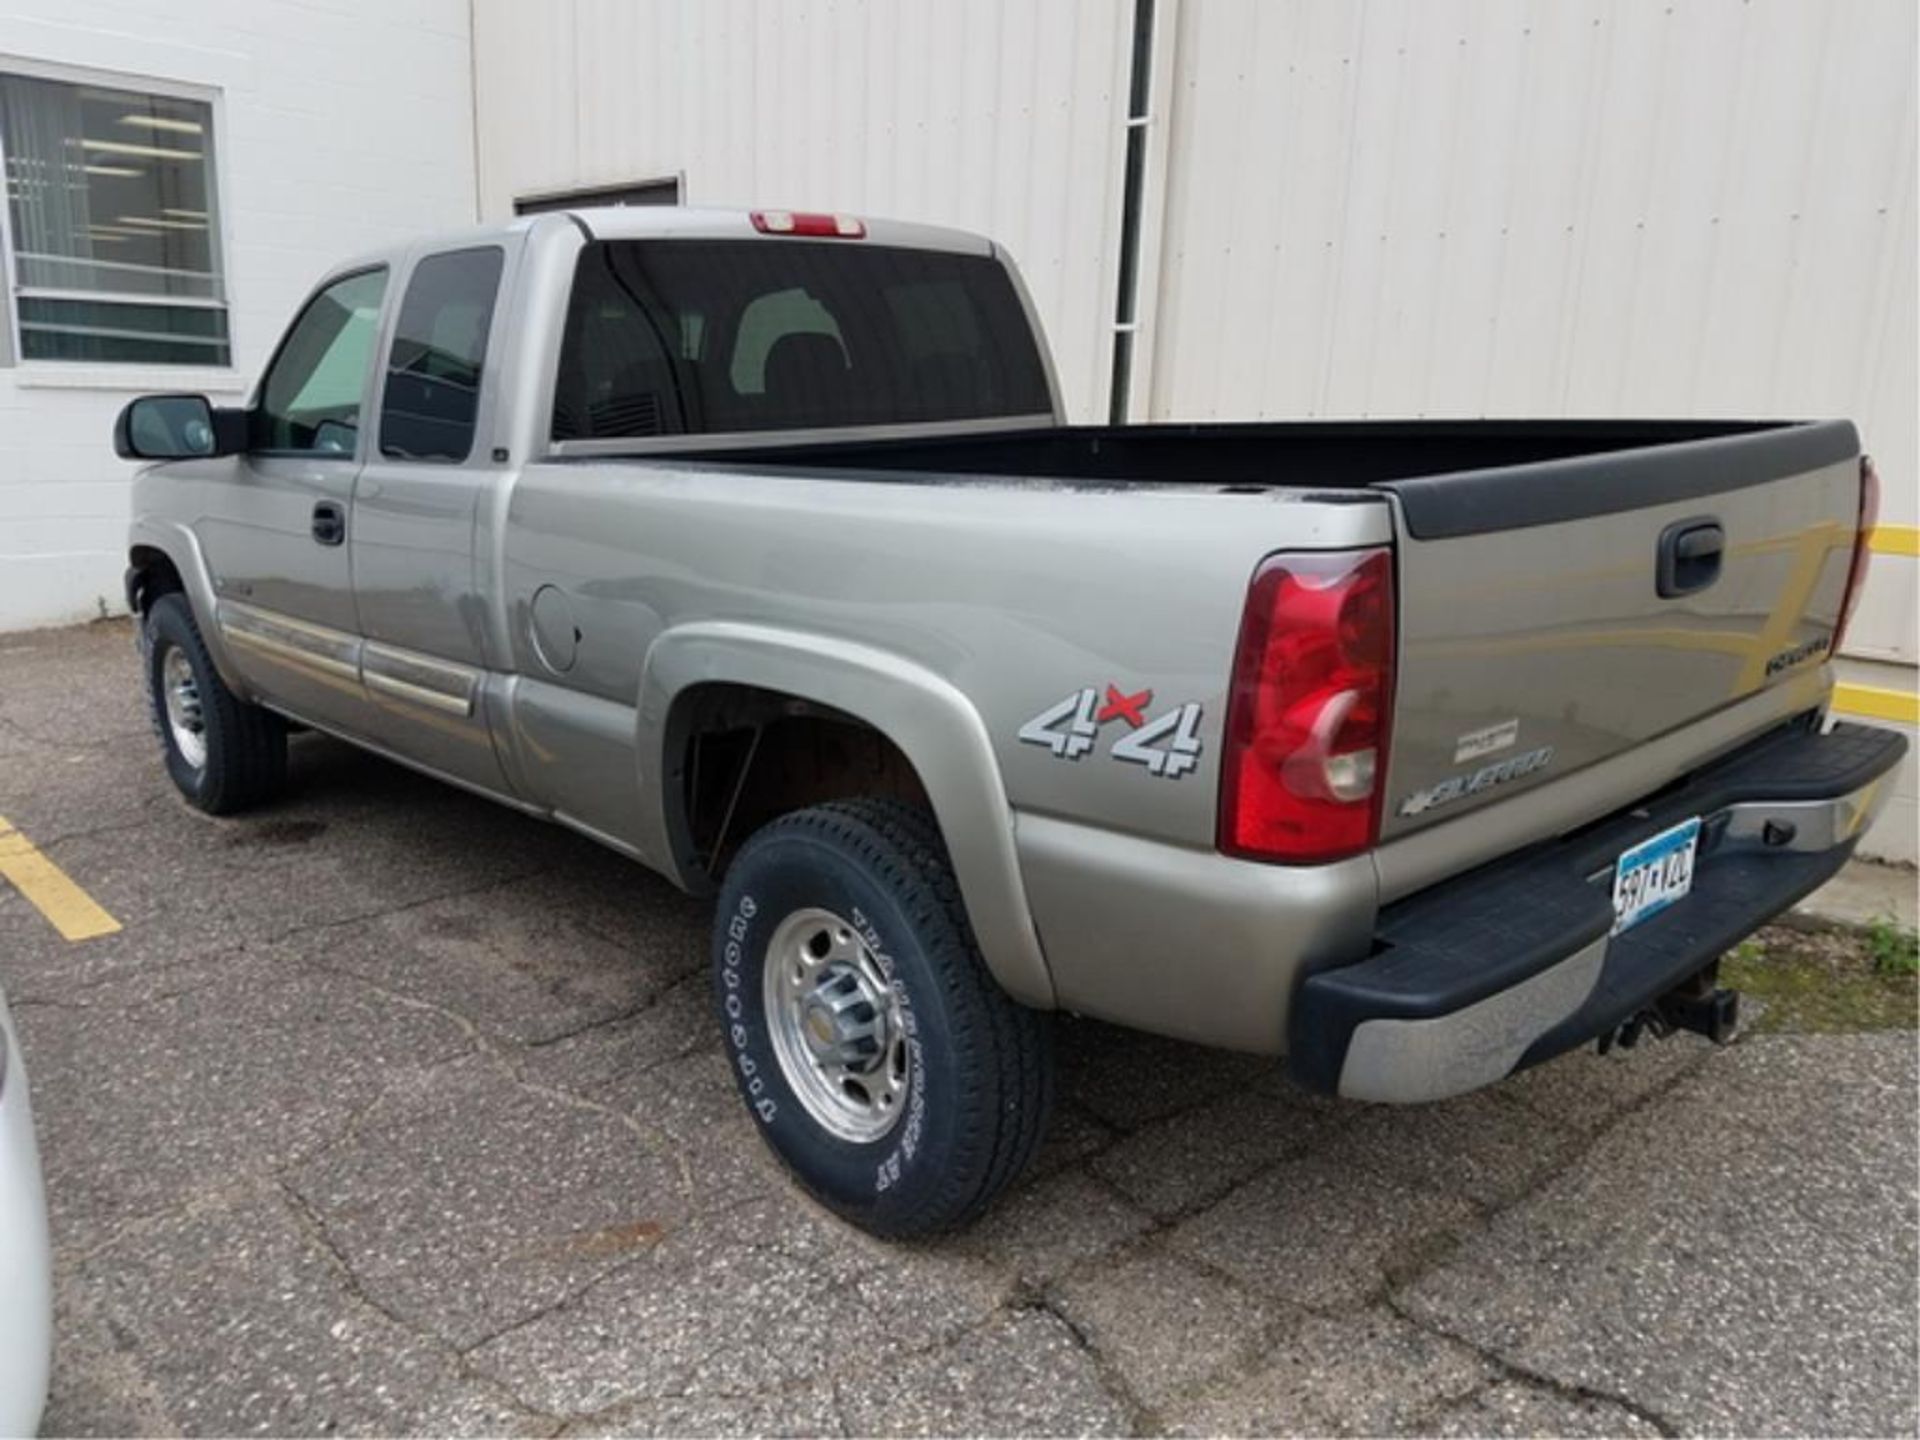 Extended Cab Pickup Truck - Image 2 of 26